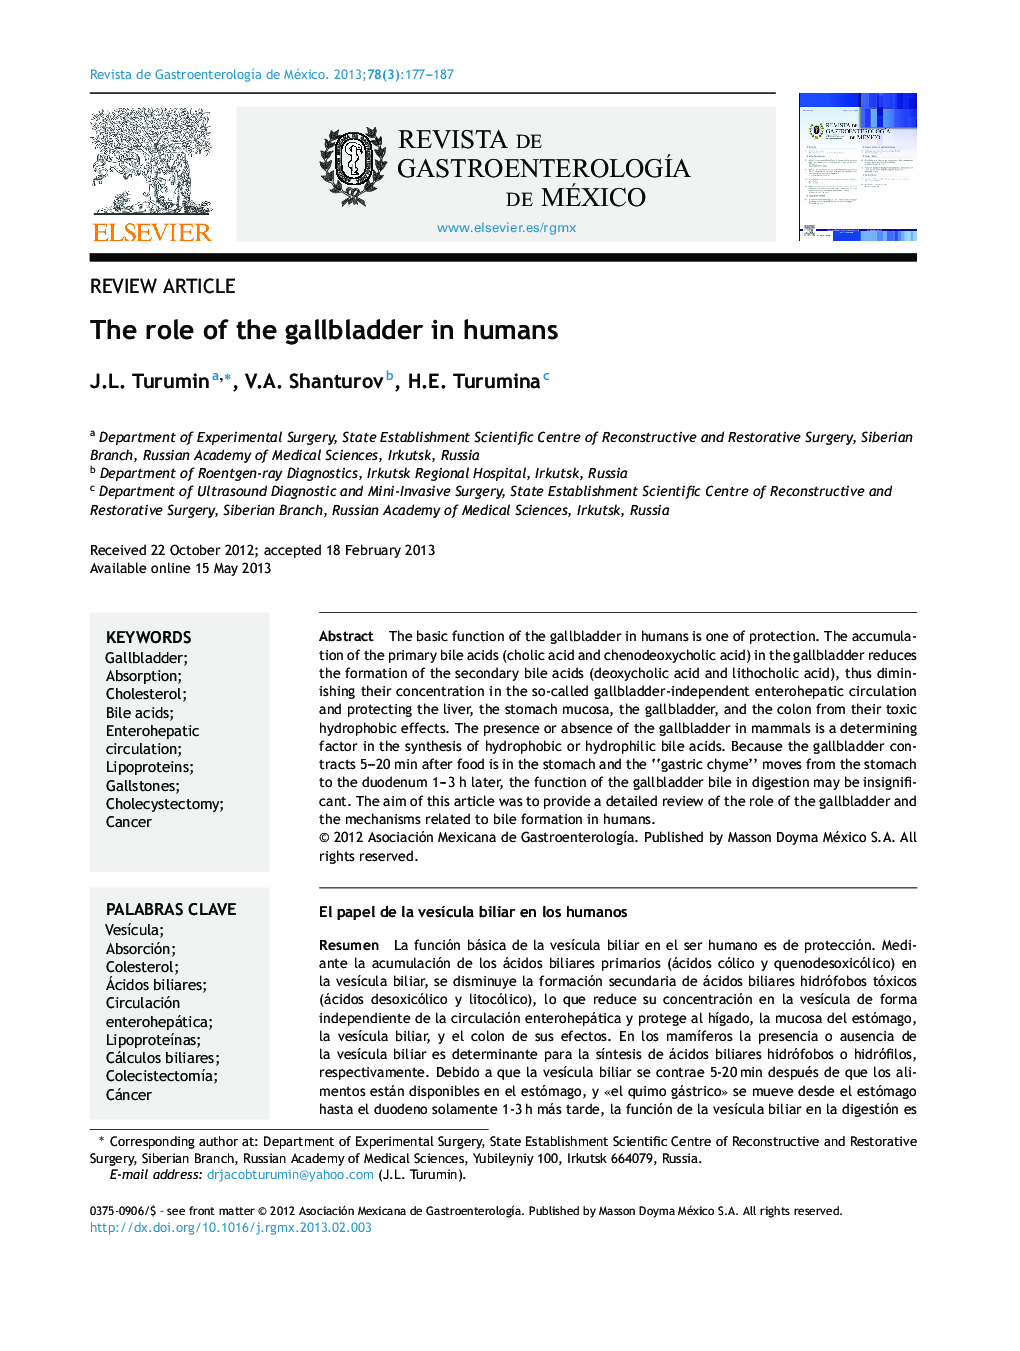 The role of the gallbladder in humans